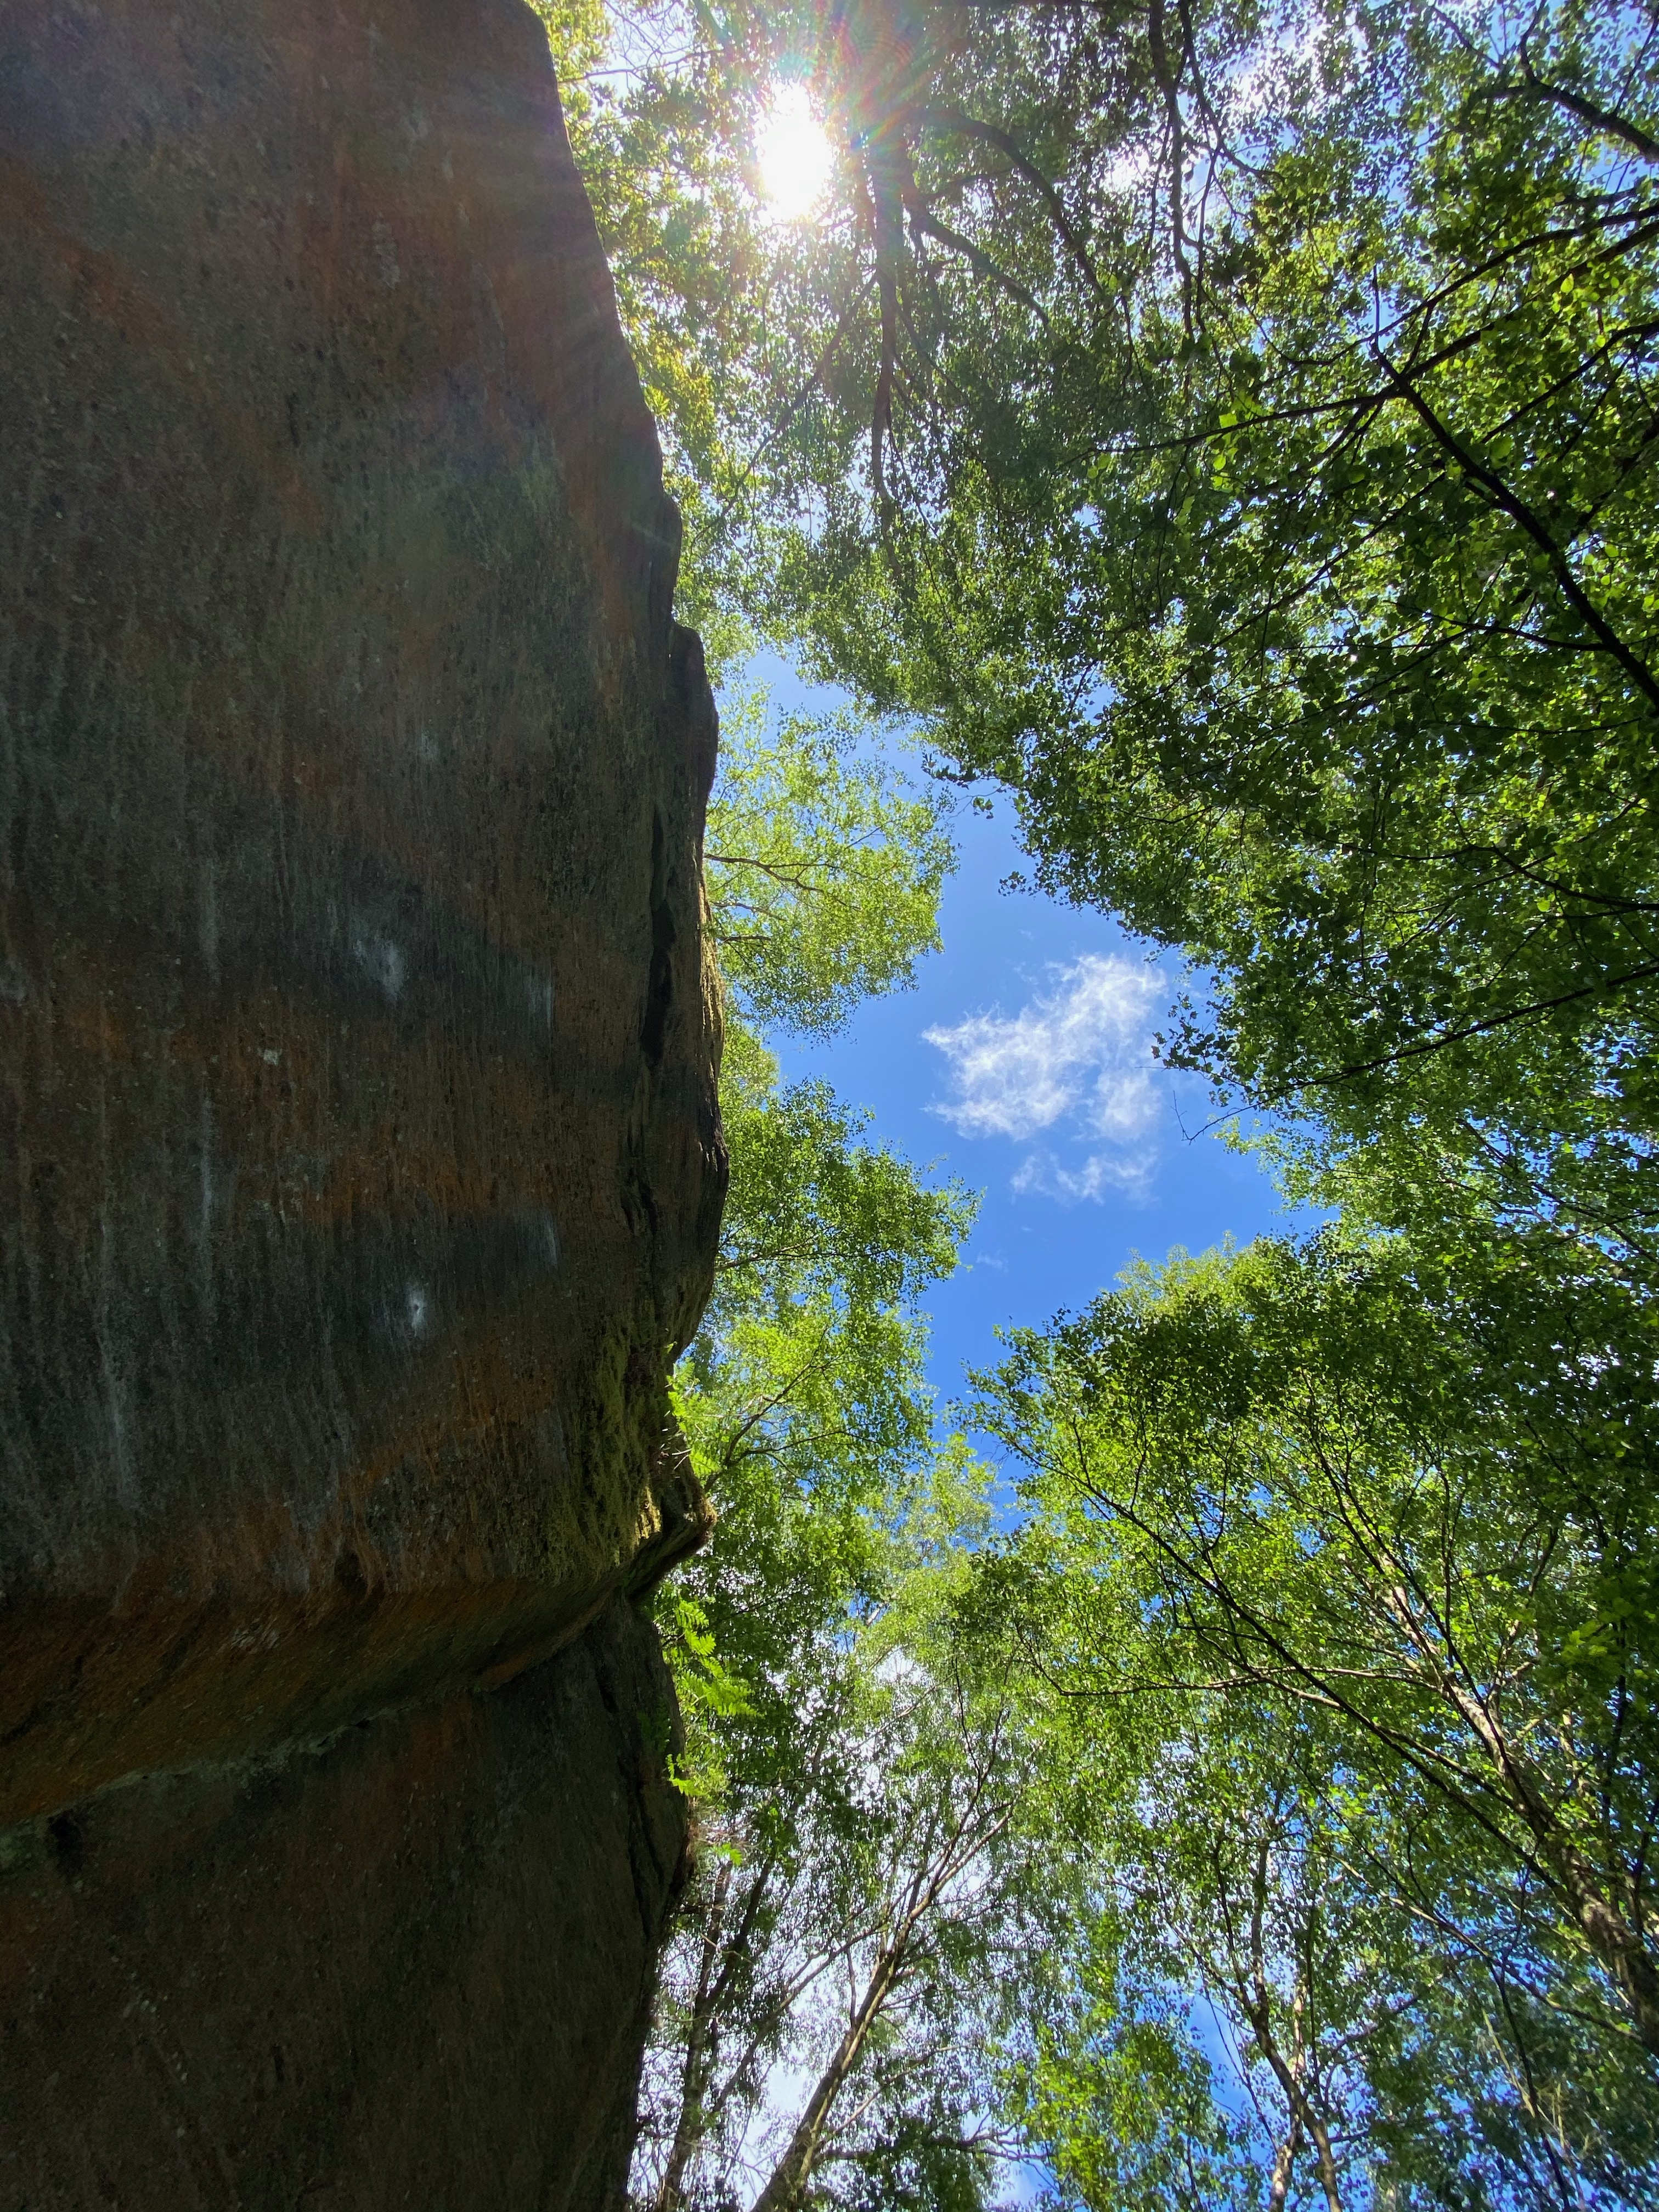 Looking up at sky with boulder